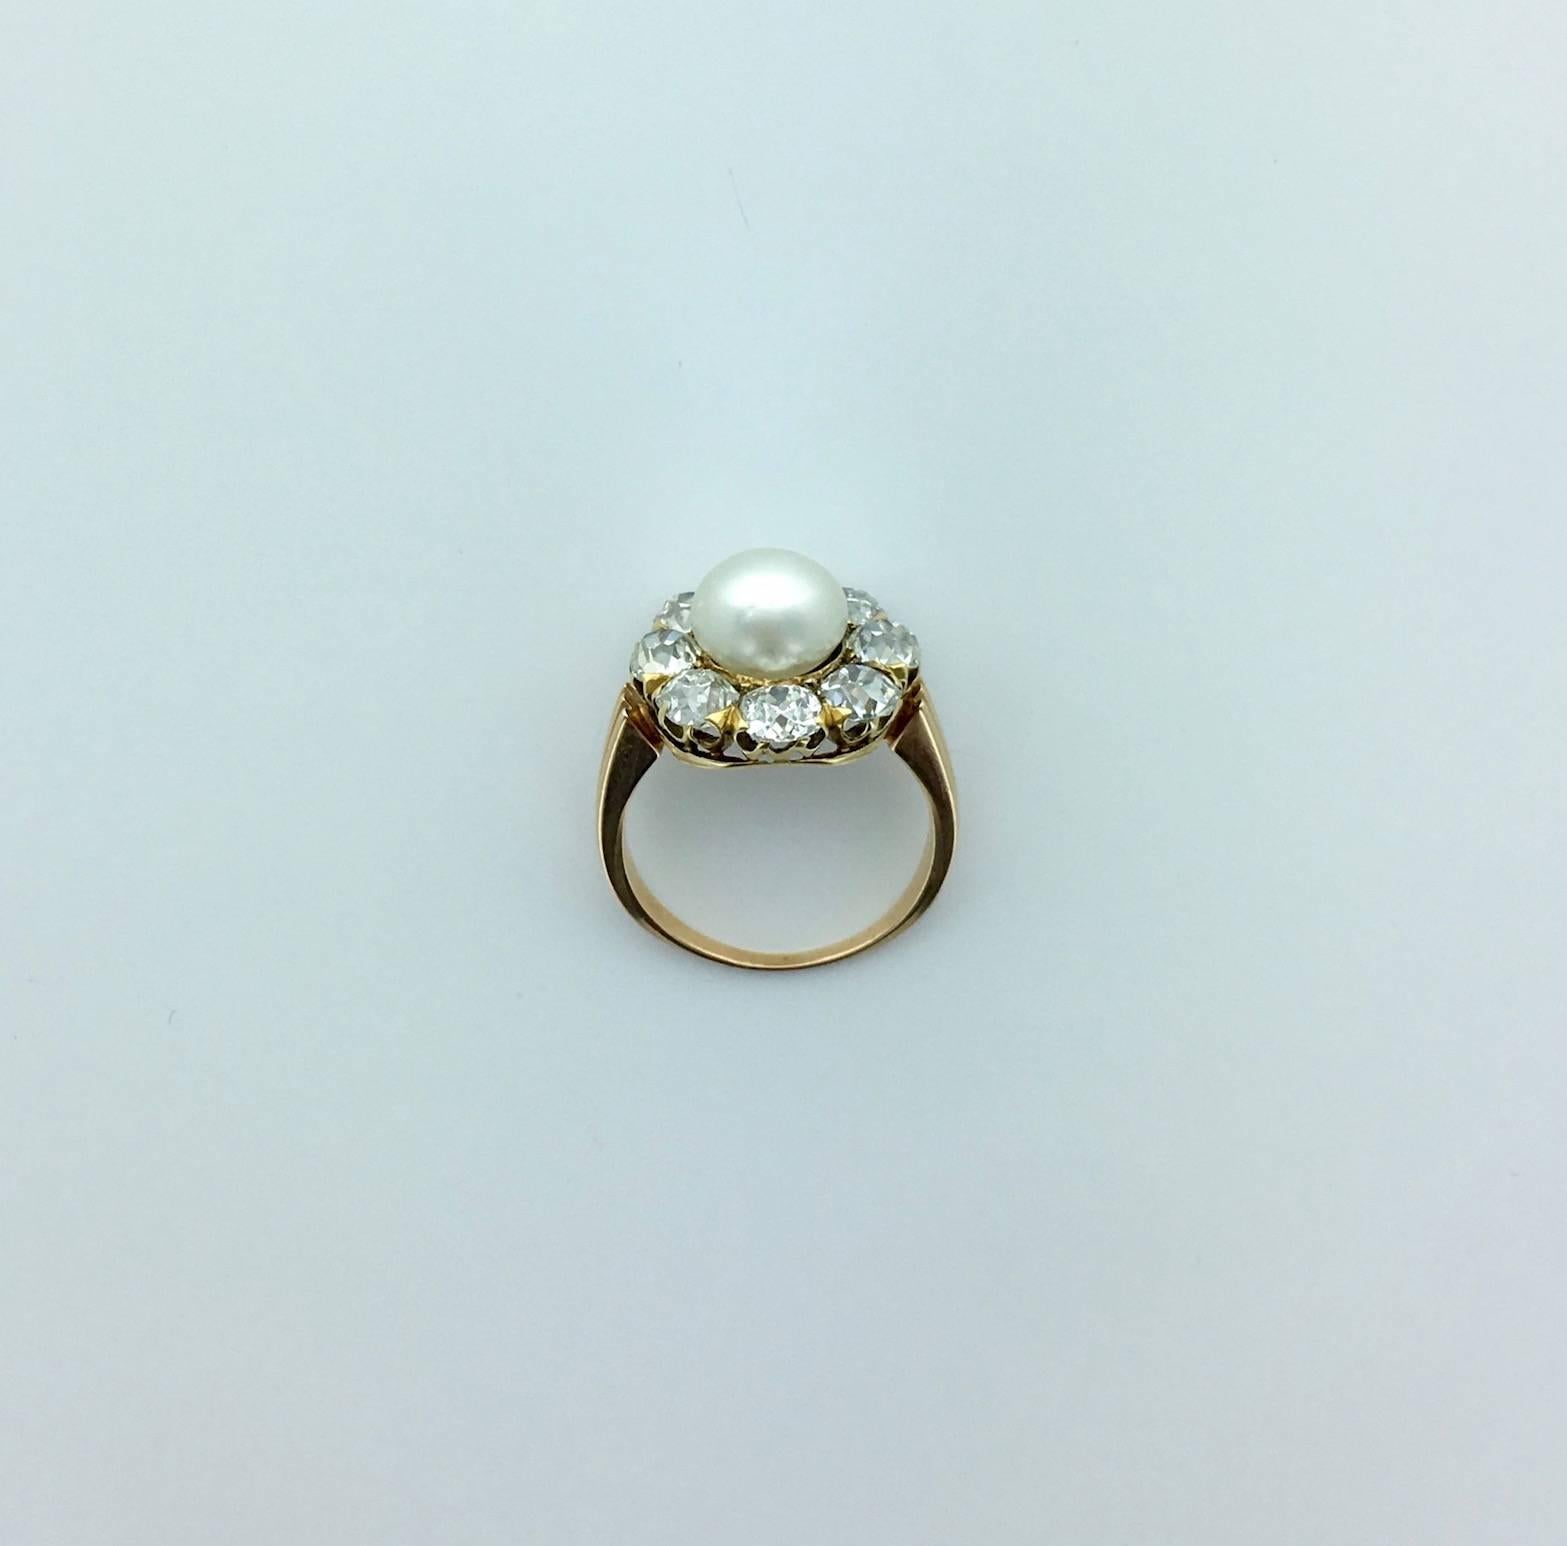 It looks like a candy. The centering Natural Pearl is surrounded by Old Mine cut Diamond (approximately 2.10 carats) on yellow gold.
Early XXth Century.
French mark.
Pearl's Measurements: 8.40x8.00 millimeters.

The Natural Pearl is accompanied by a